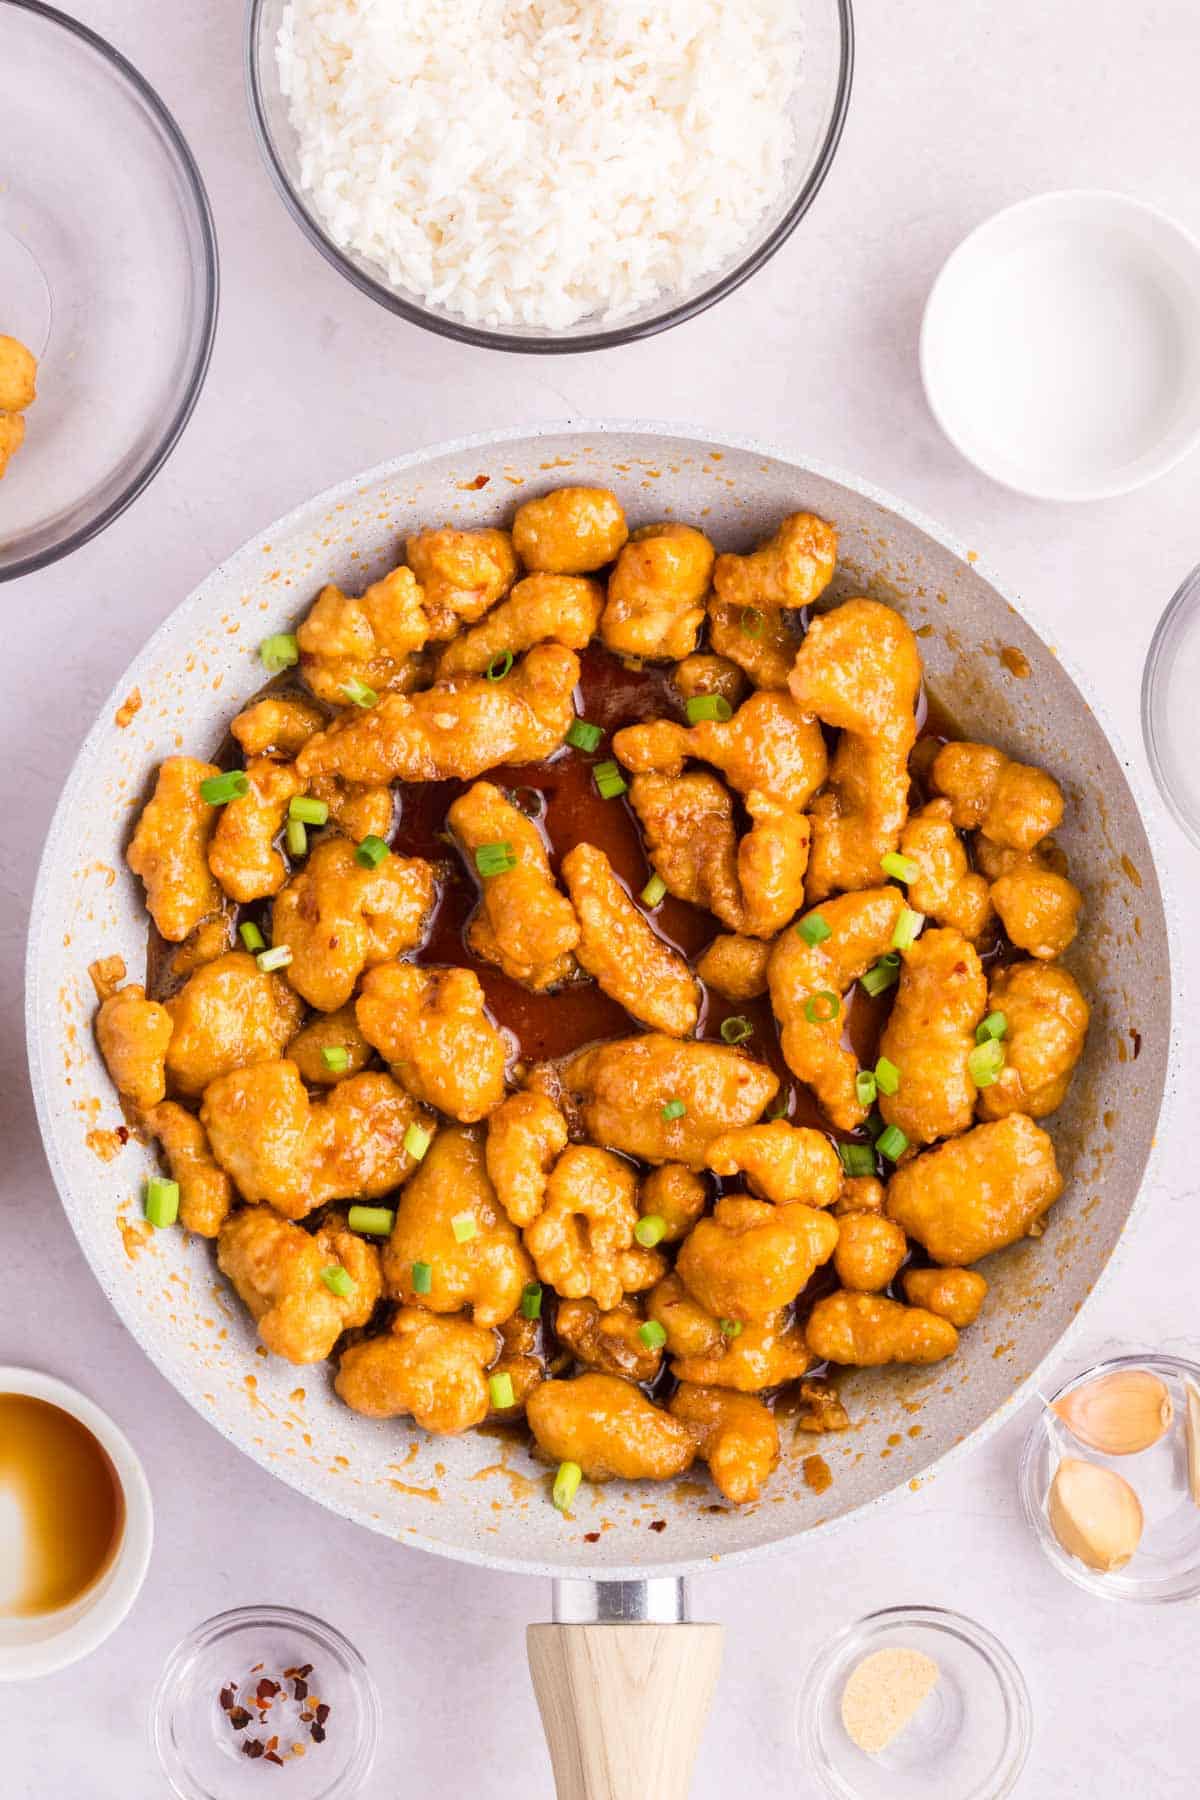 A pan of Chinese crispy honey garlic chicken sprinkled with green onion slices.